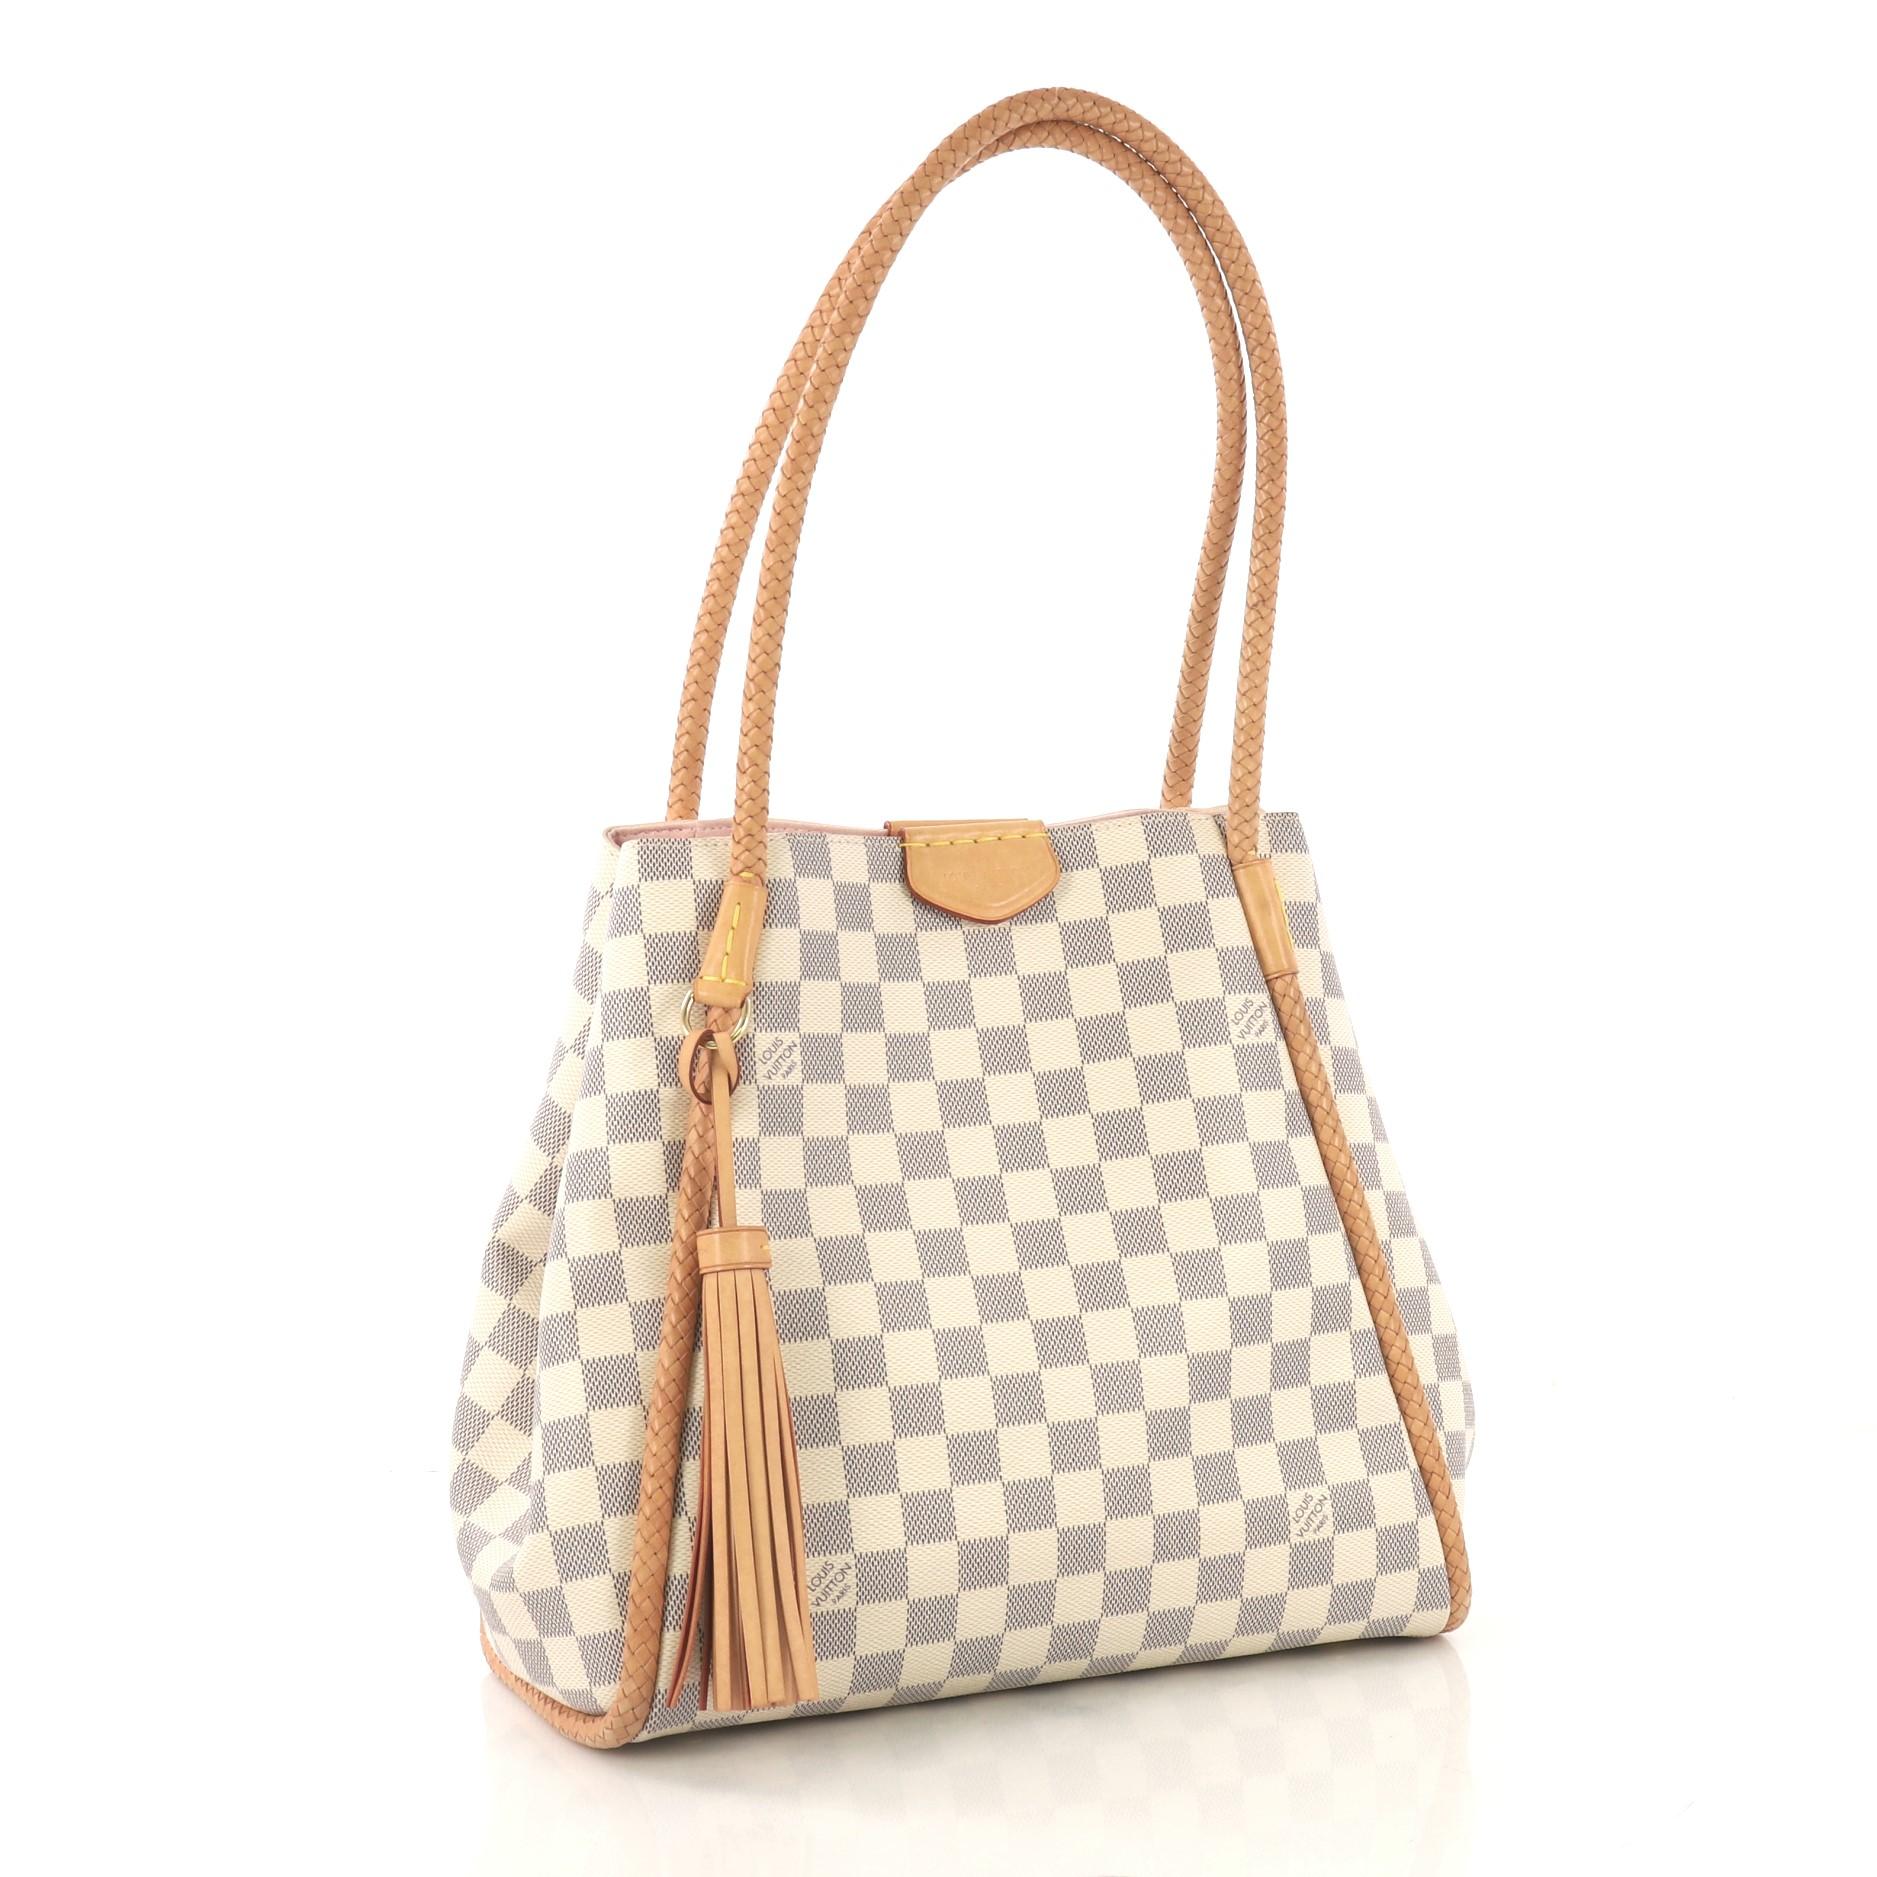 This Louis Vuitton Propriano Handbag Damier, crafted in damier azur coated canvas, features braided leather piping and handles, fringe tassel, and gold-tone hardware. Its magnetic closure opens to a light pink microfiber interior with zip pocket.